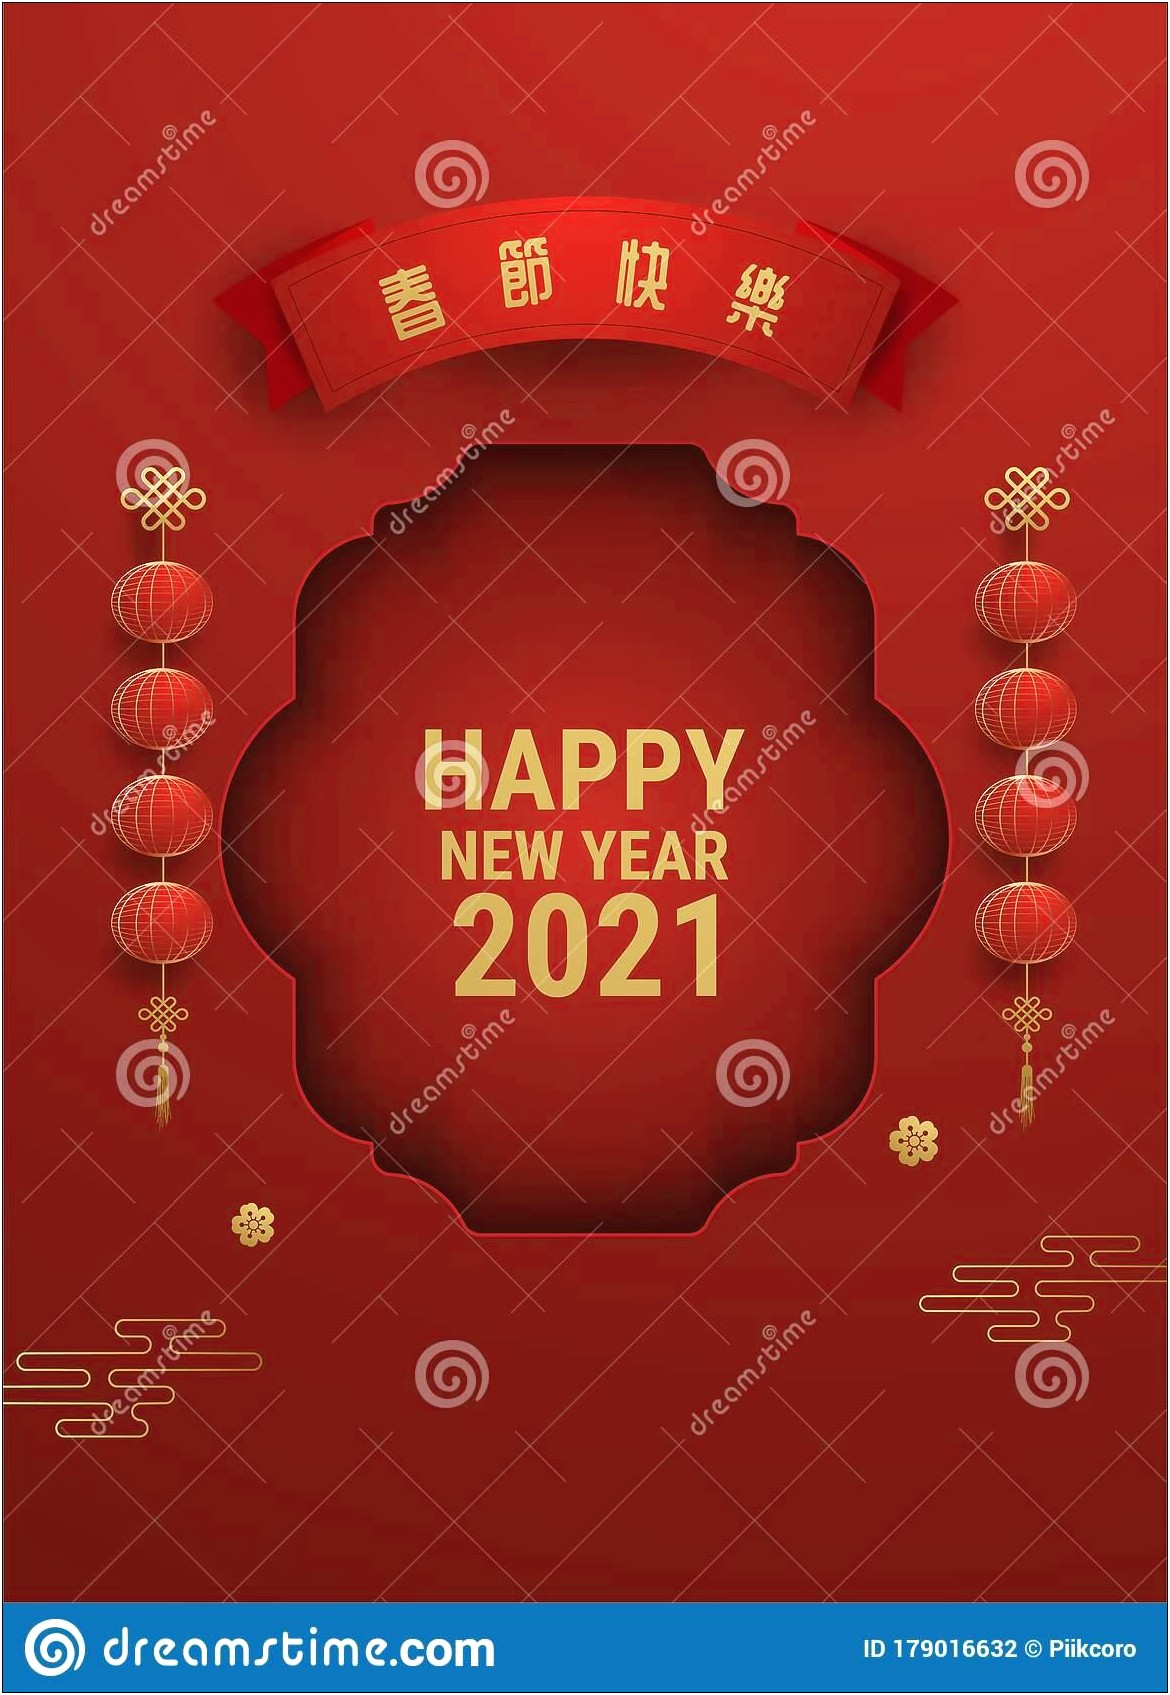 Chinese New Year Greeting Card Template Free